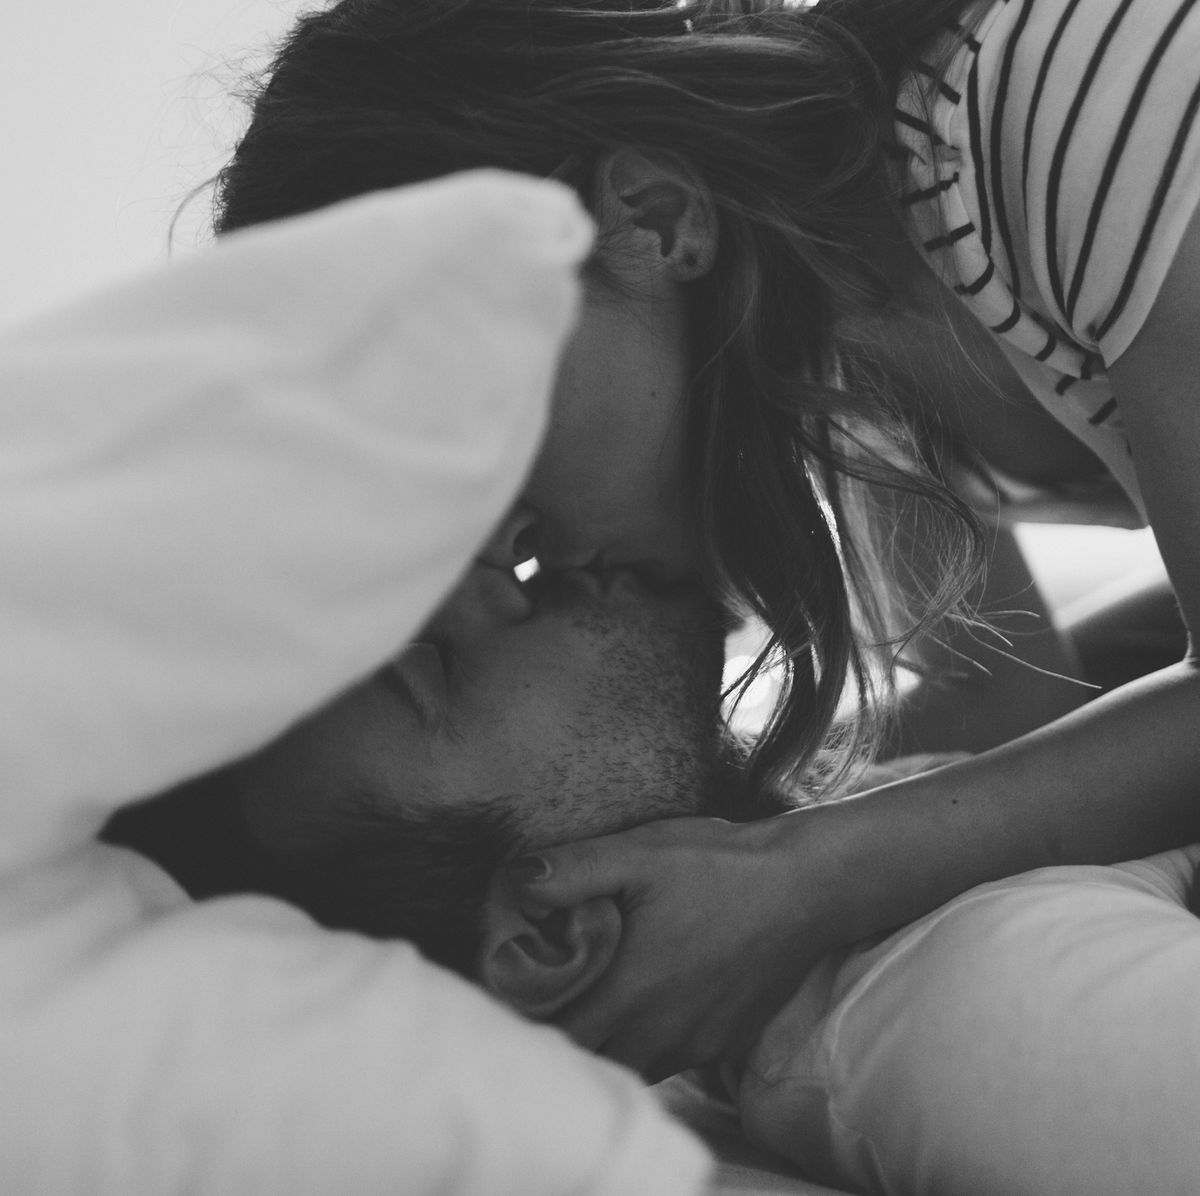 How to Please Your Man Tonight - Ways to Satisfy a Men in Bed